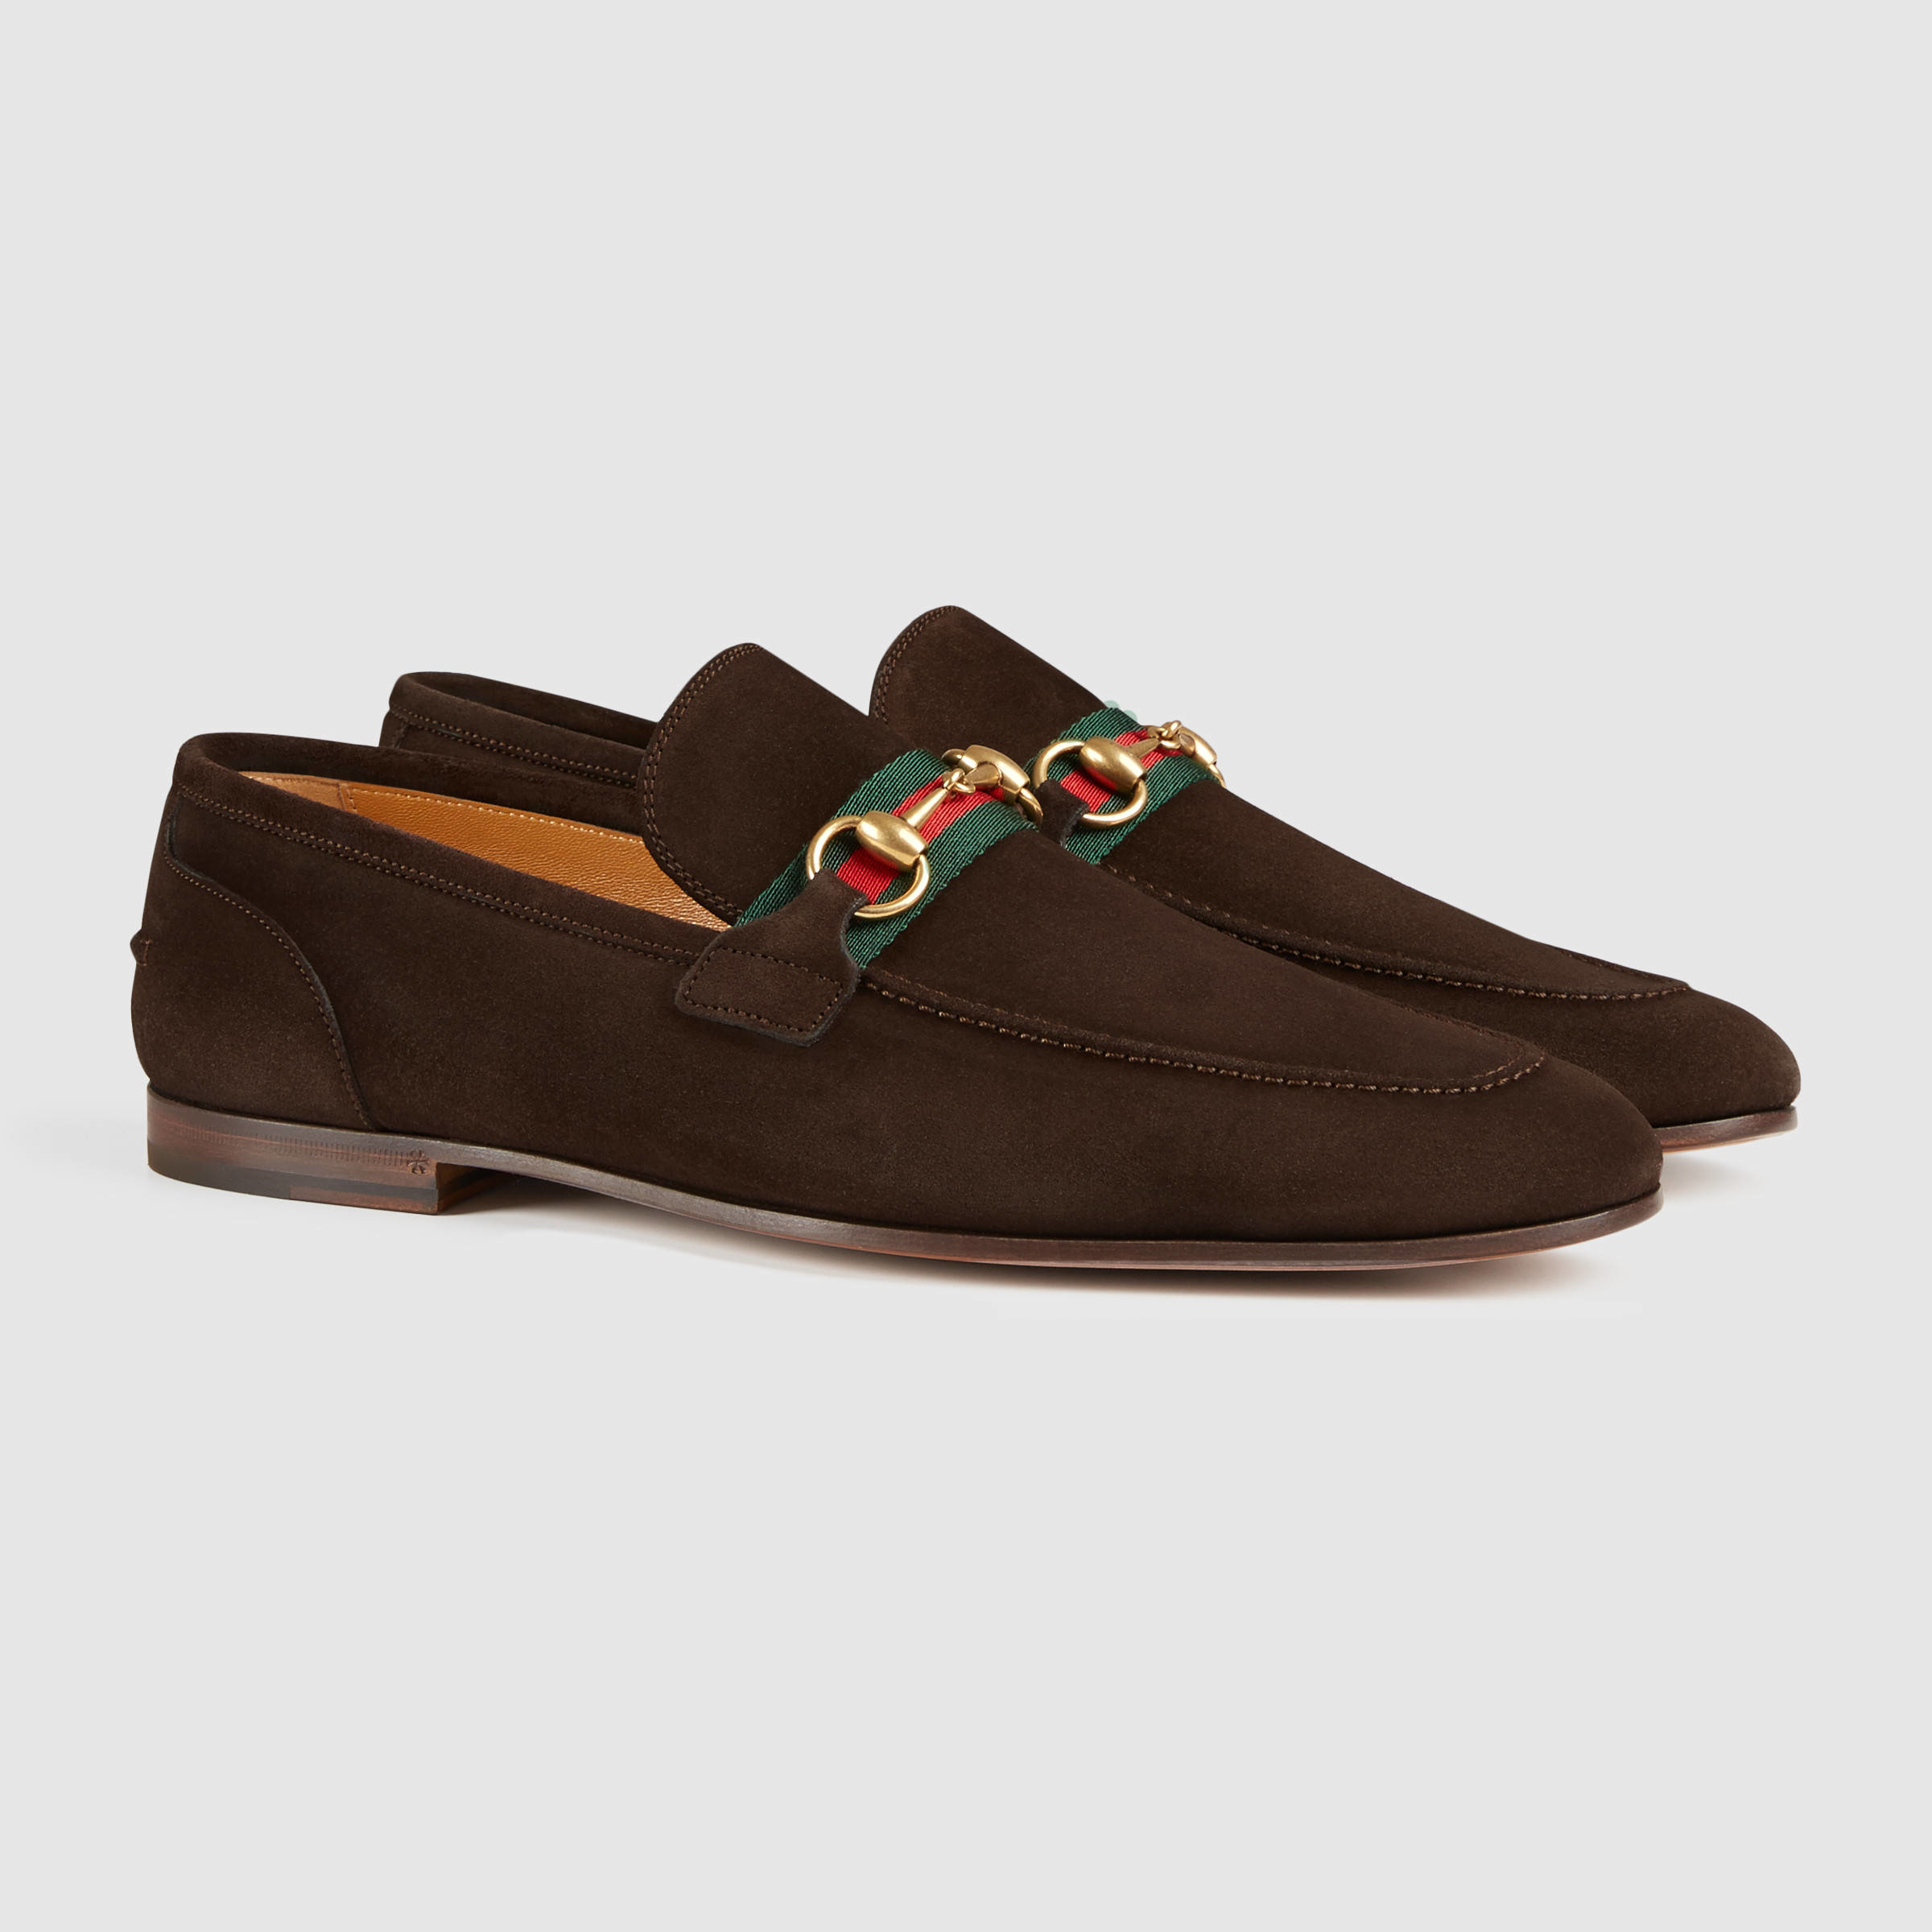 Lyst - Gucci Horsebit Suede Loafer With Web in Brown for Men